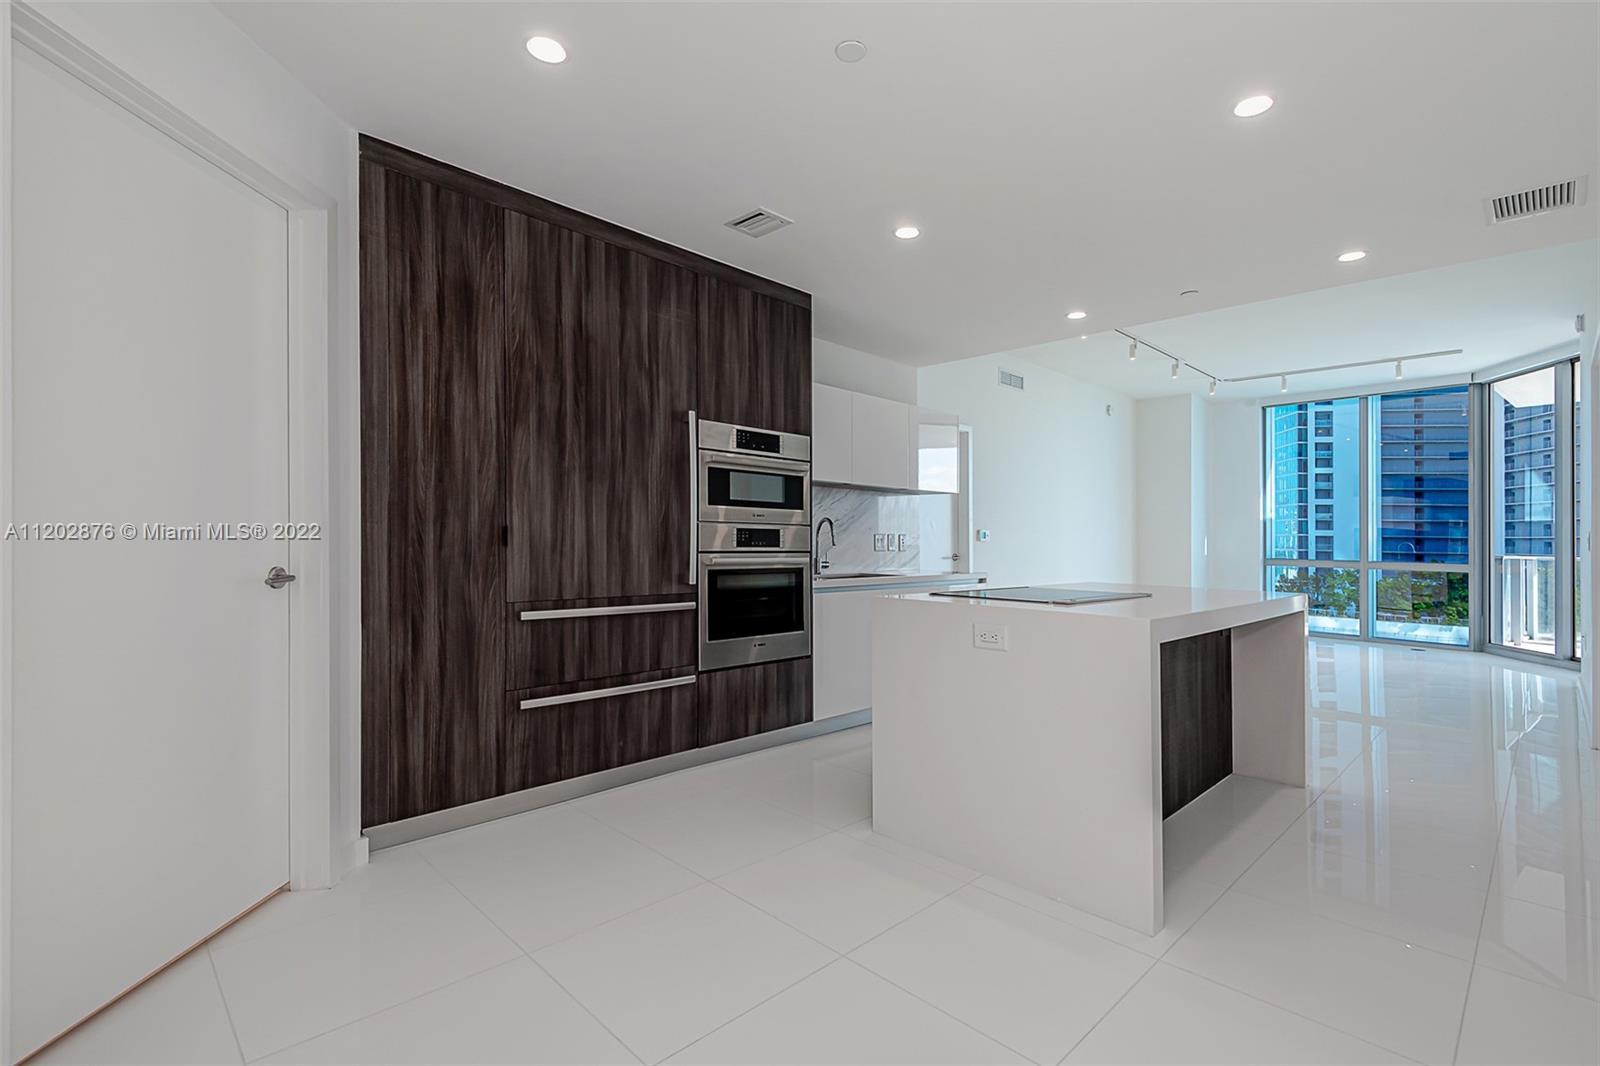 Paramount  - Miami World Center is the place to be ...  , Luxury unit 2 + Den /3 bath(den is enclose